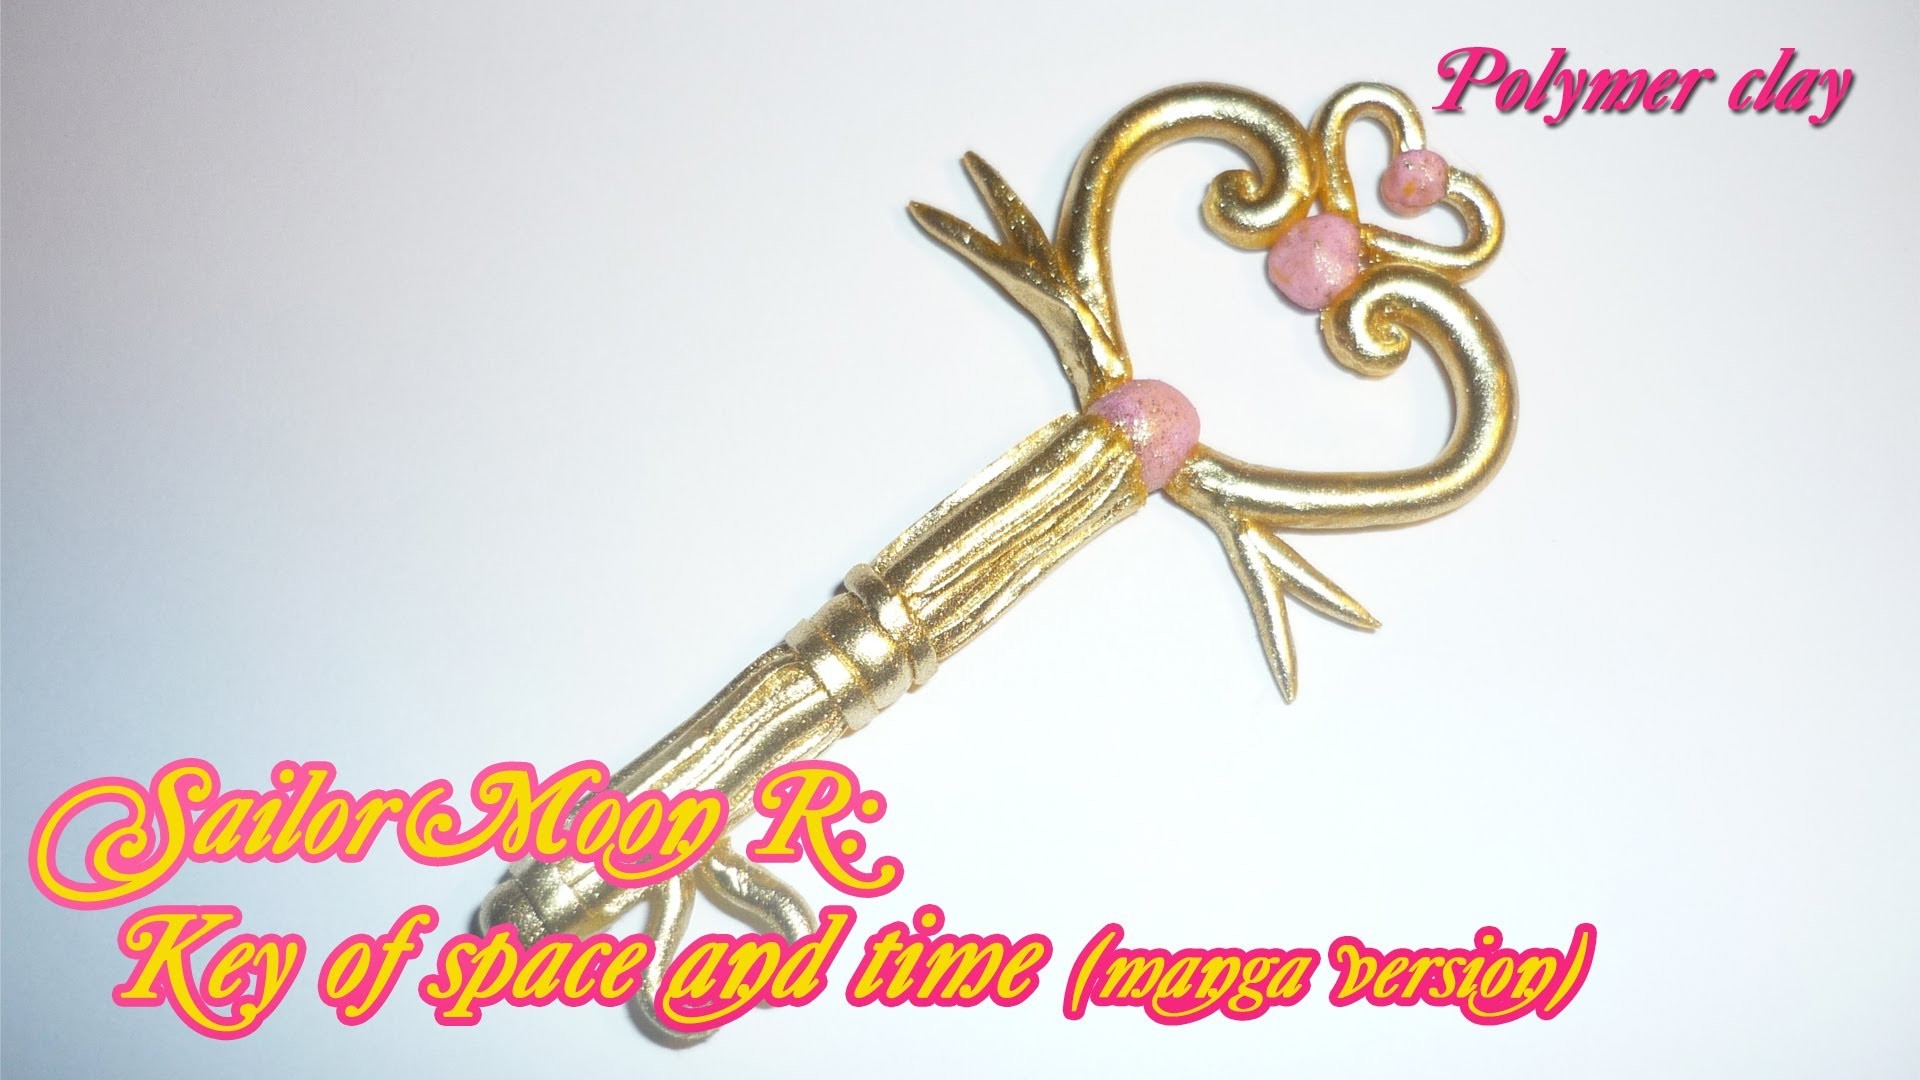 Sailor Moon R: Key of Space and time (manga ver.) Polymer clay